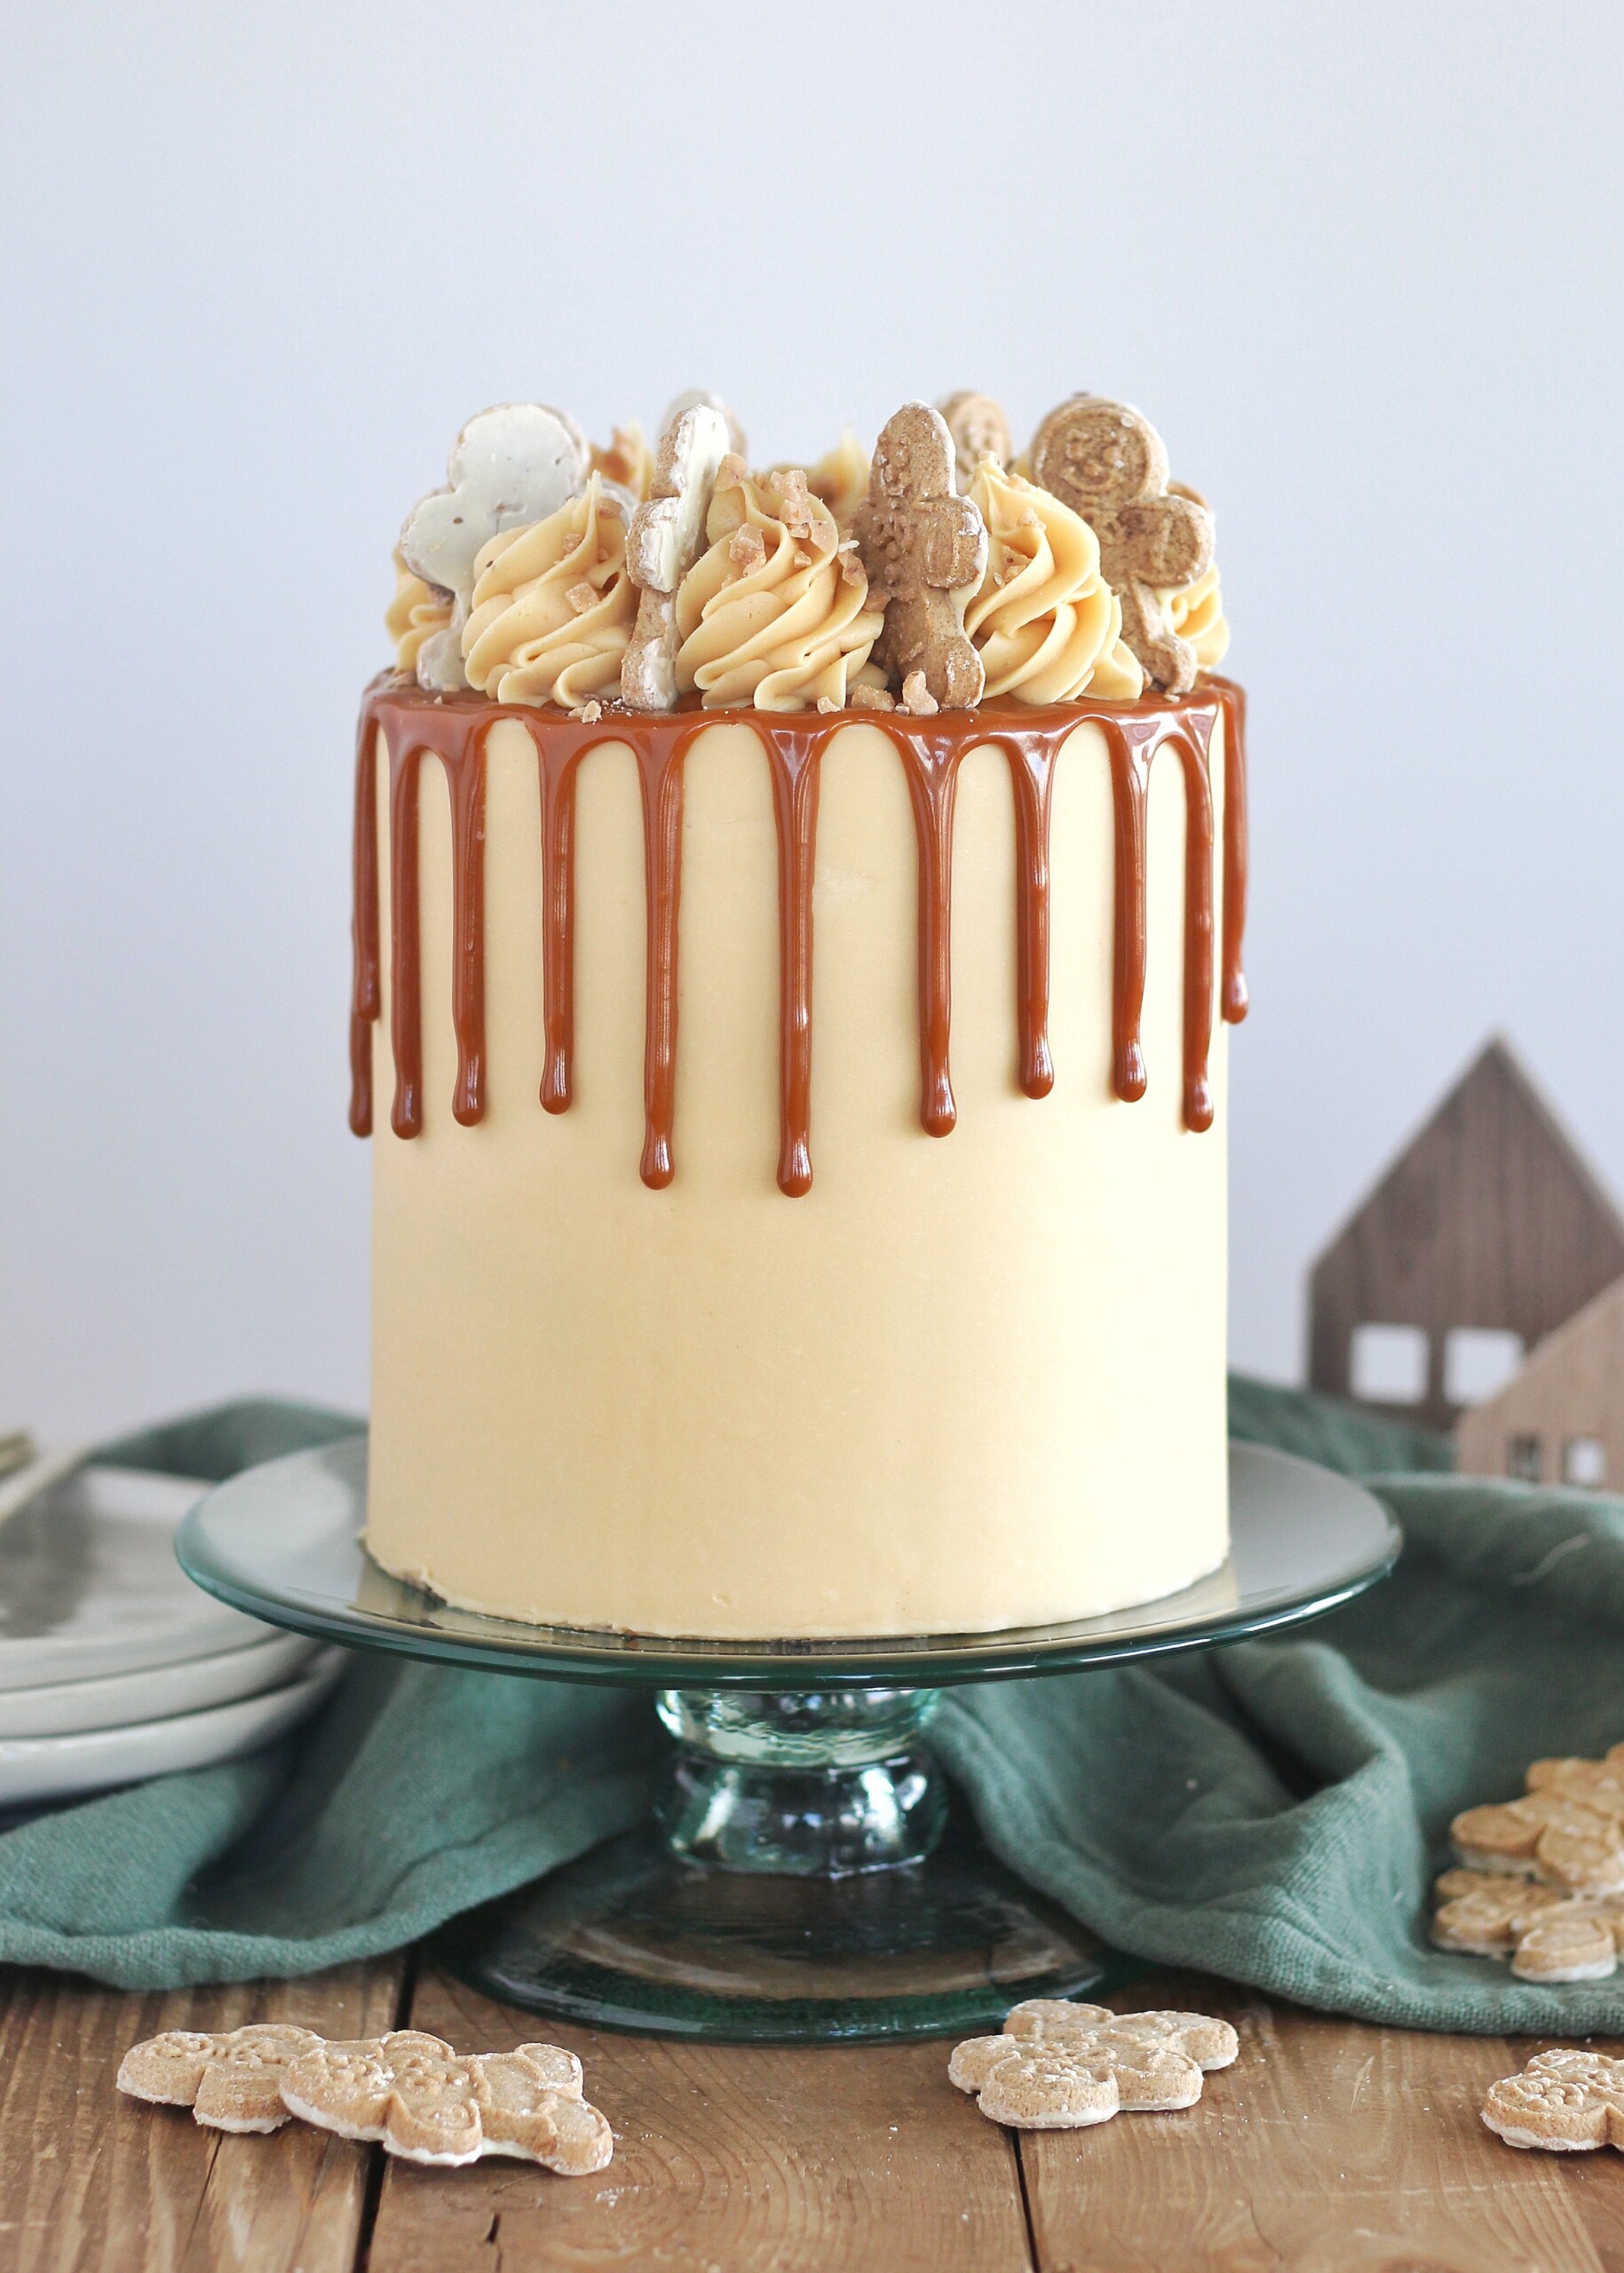 The most delicious gingerbread cake layers with salted caramel buttercream, caramel drip and toffee bits.